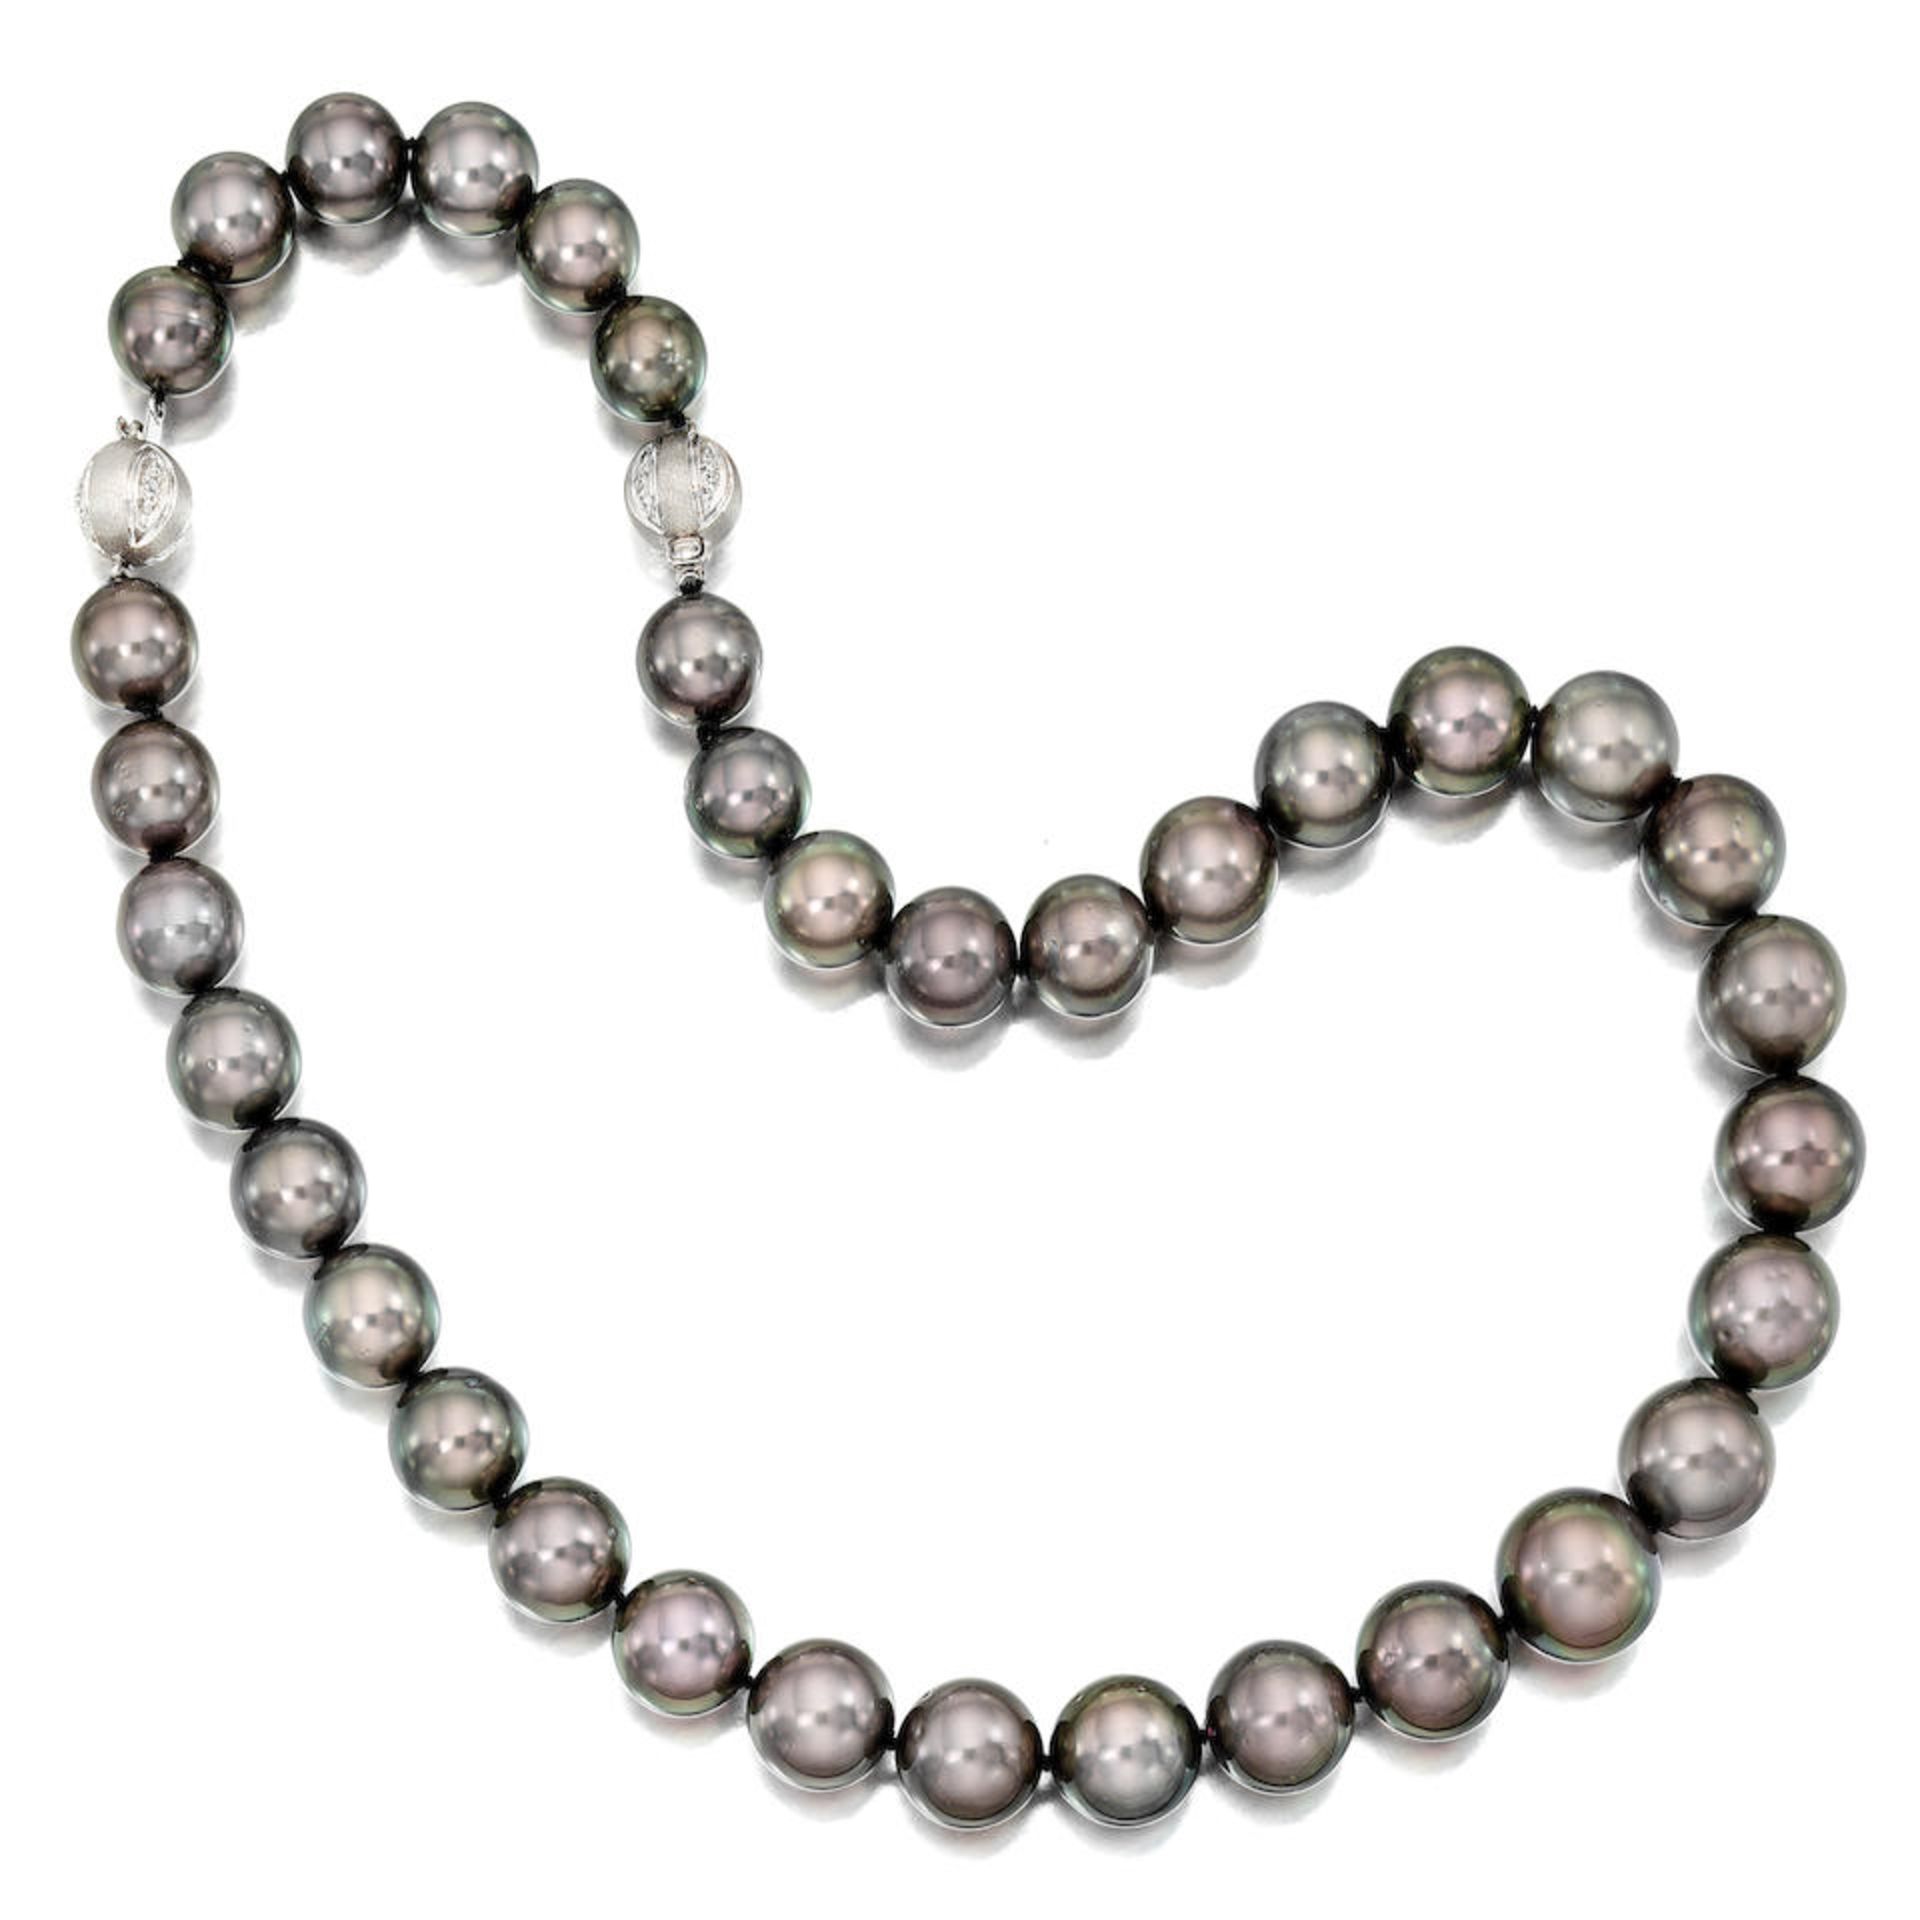 AN 18K WHITE GOLD, DIAMOND AND CULTURED PEARL NECKLACE